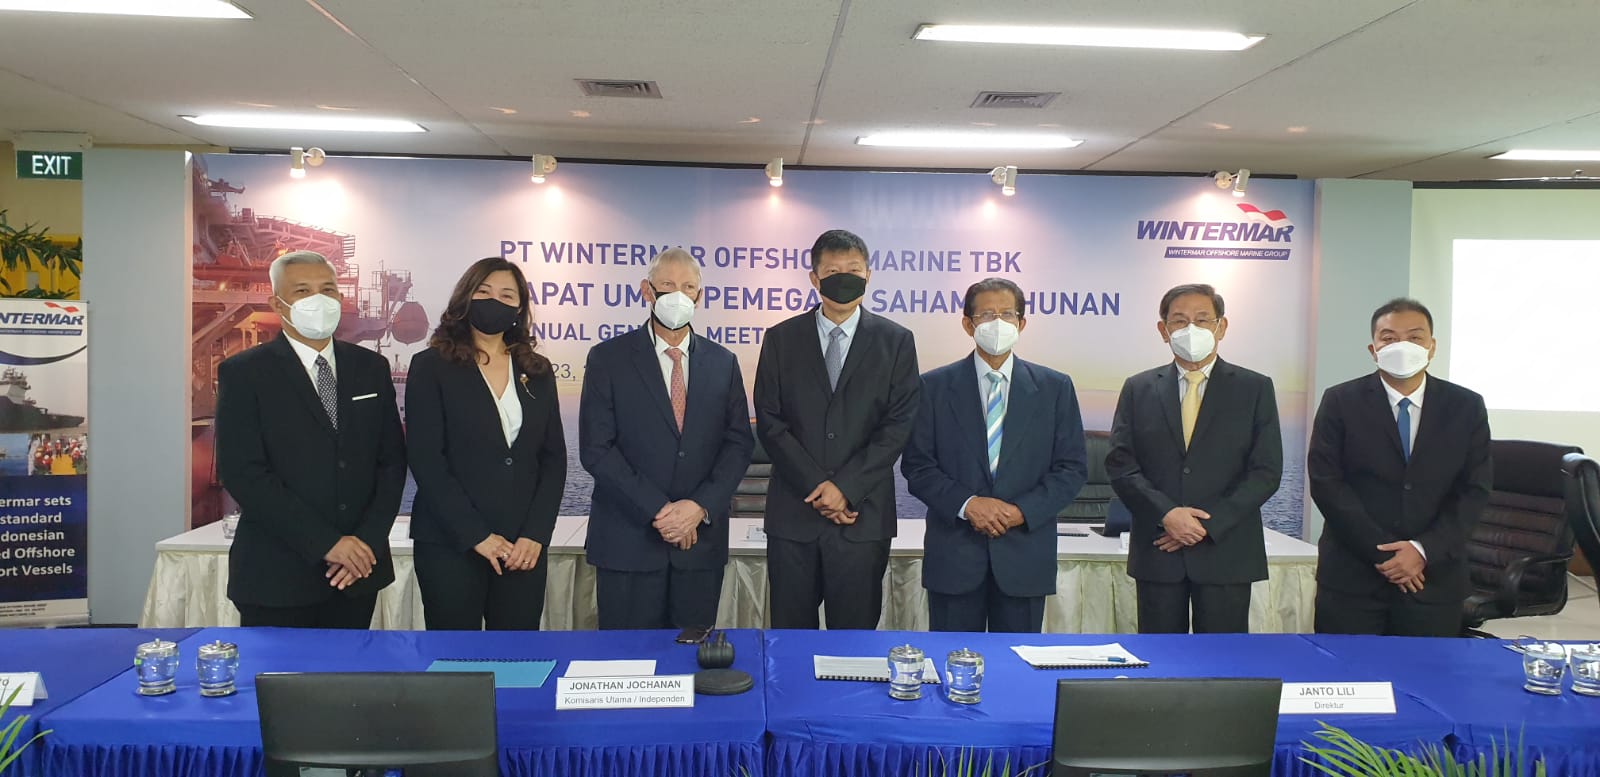 Wintermar successfully concluded the Annual General Meeting of Shareholders on 23 June 2022